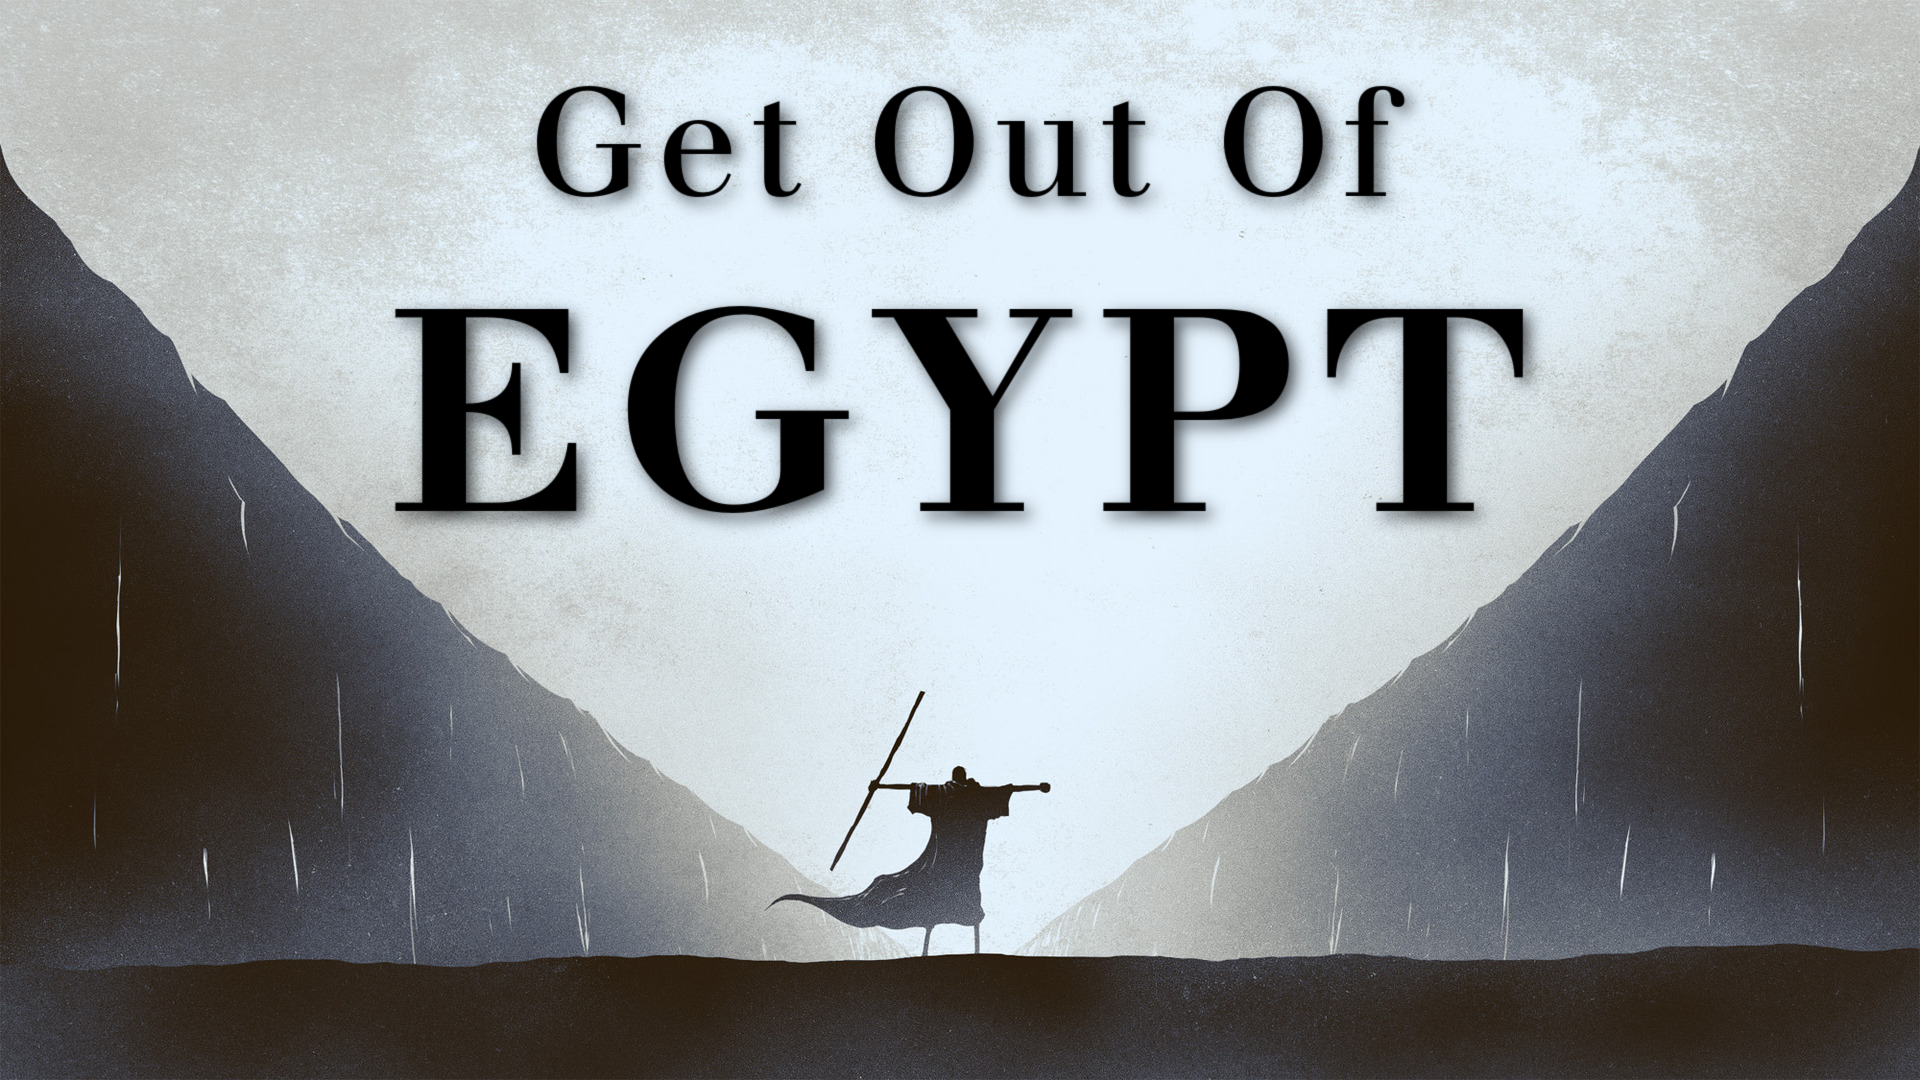 Get Out of Egypt